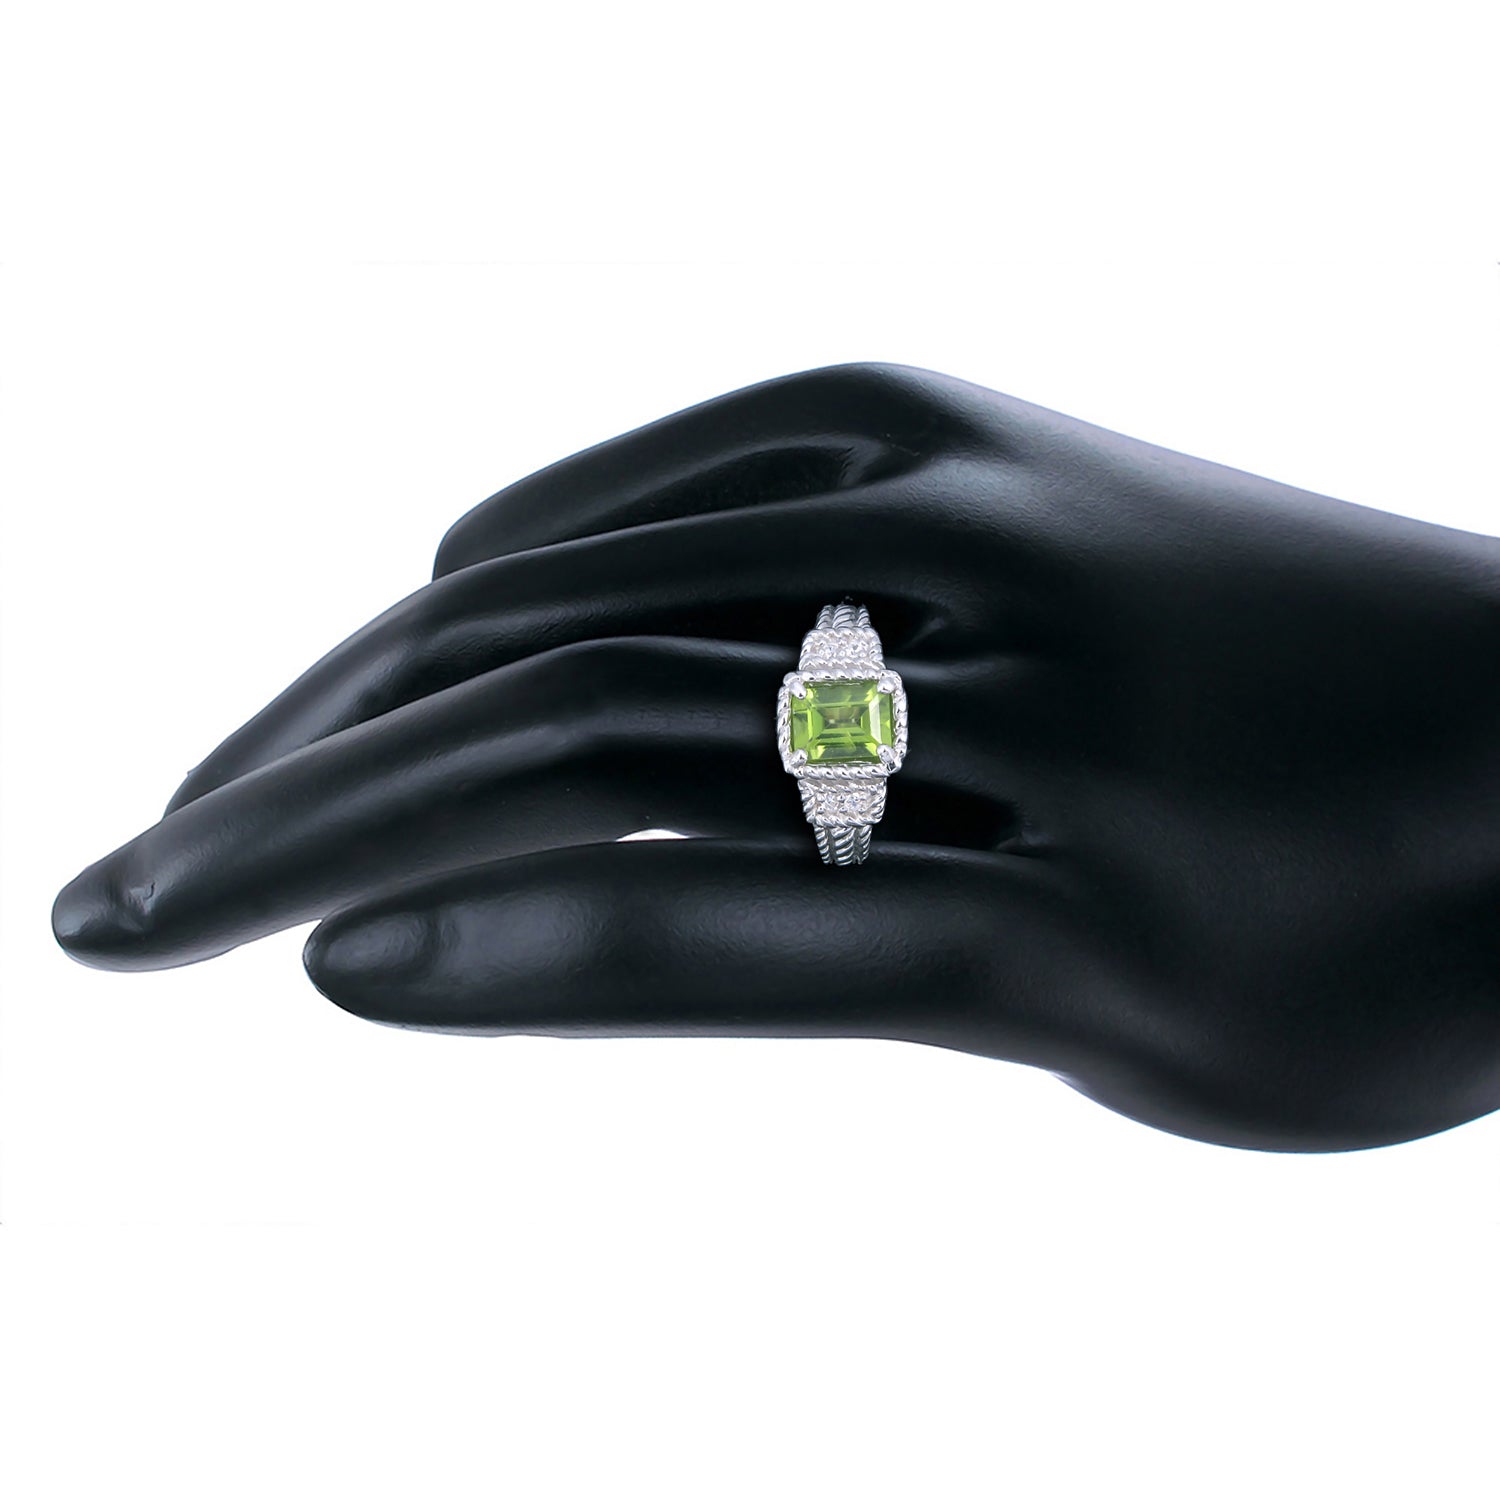 1.10 cttw Emerald Peridot Ring .925 Sterling Silver with Rhodium Plating 8x6 MM